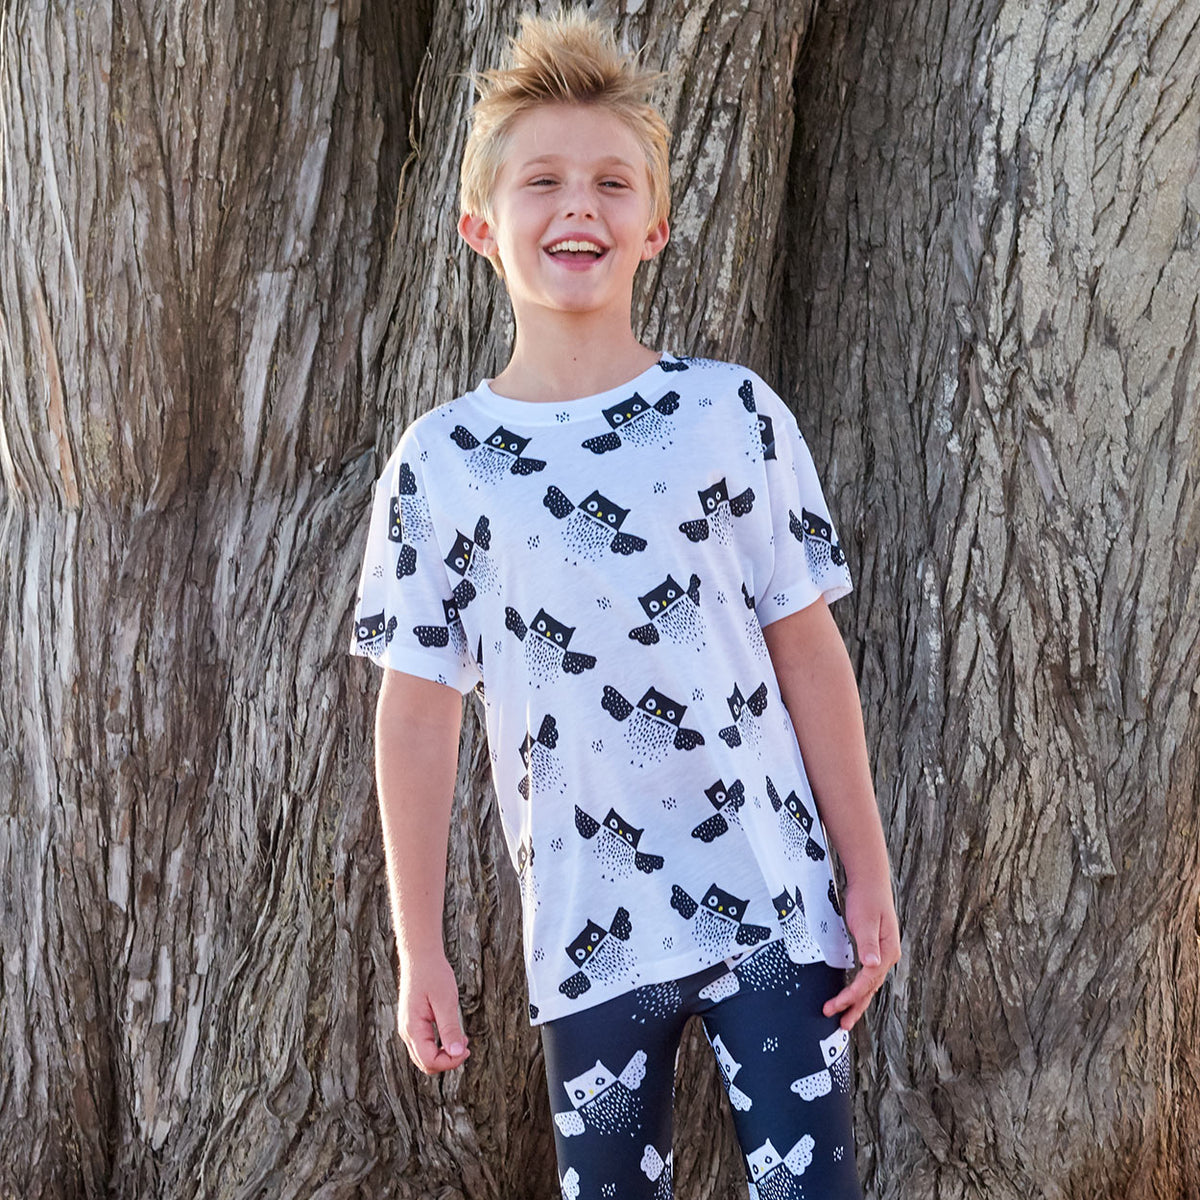 Kids Owls Pattern Graphic Tshirt Black White Size Xs L Unisex Smiling Boy At The Beach By A Tree Sunpoplife